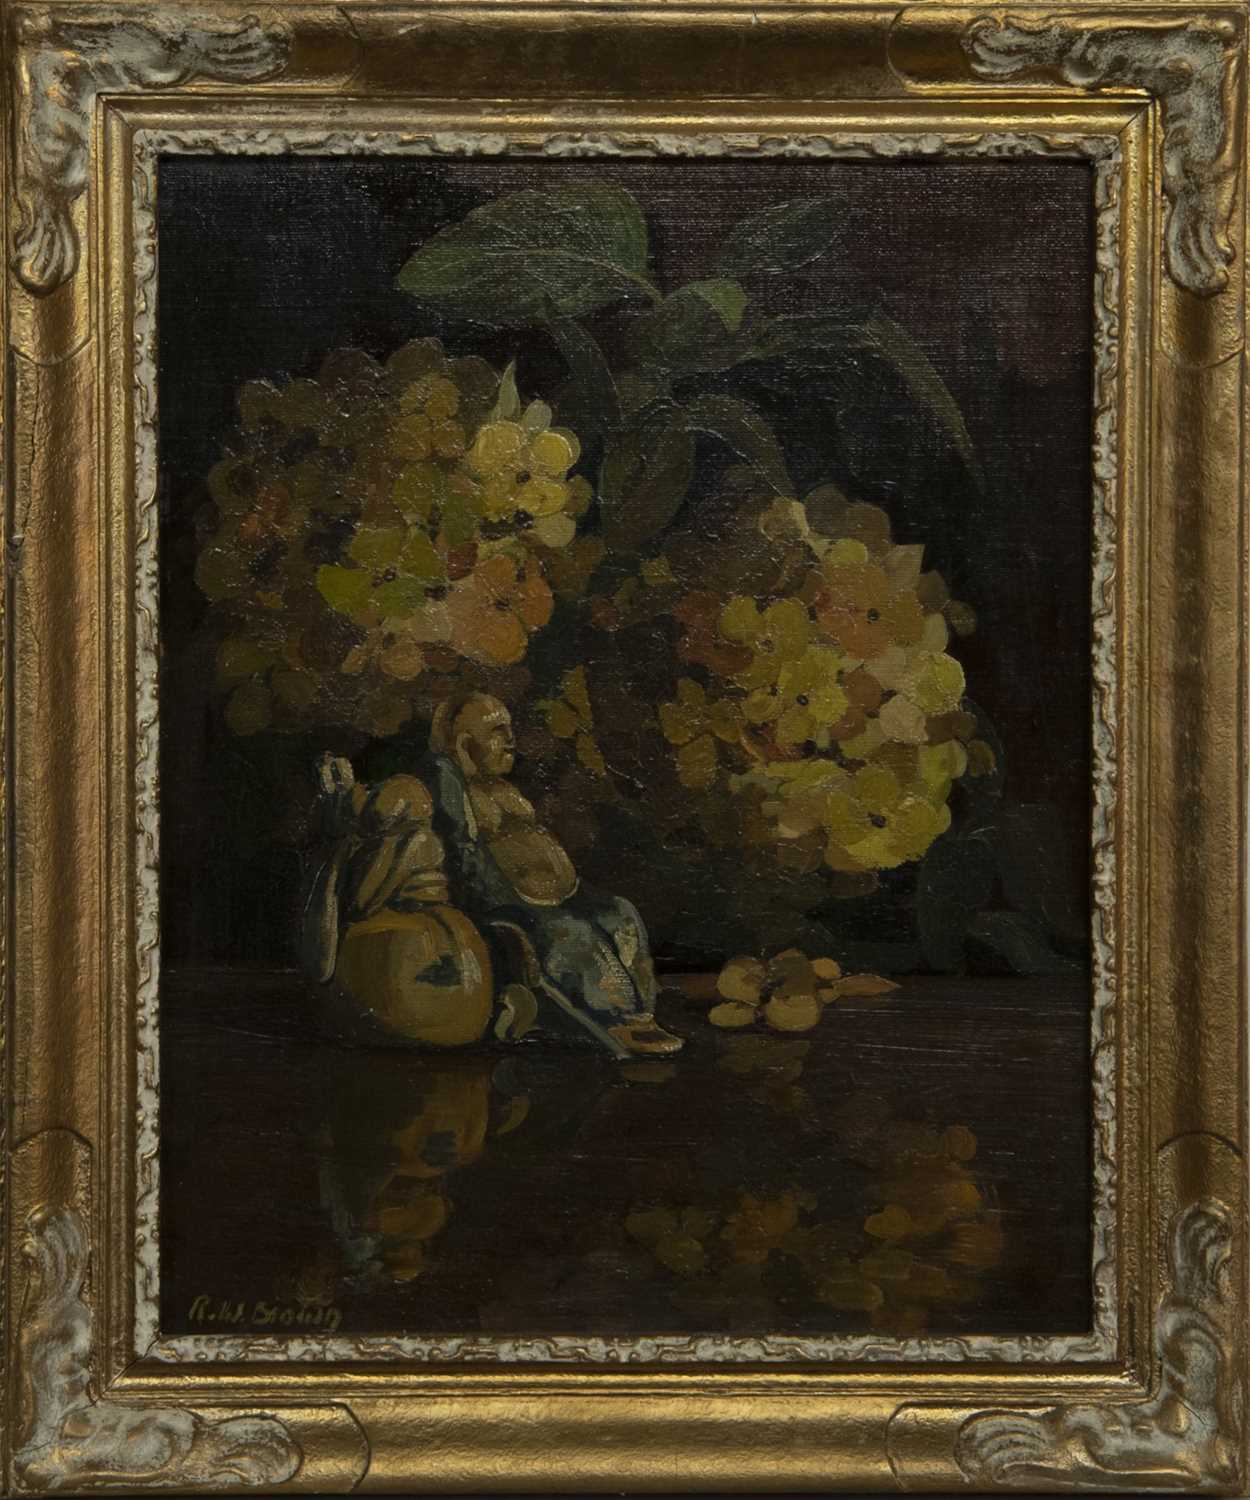 Lot 51 - STILL LIFE WITH FIGURINES, AN OIL BY ROBERT WILLIAM BROWN